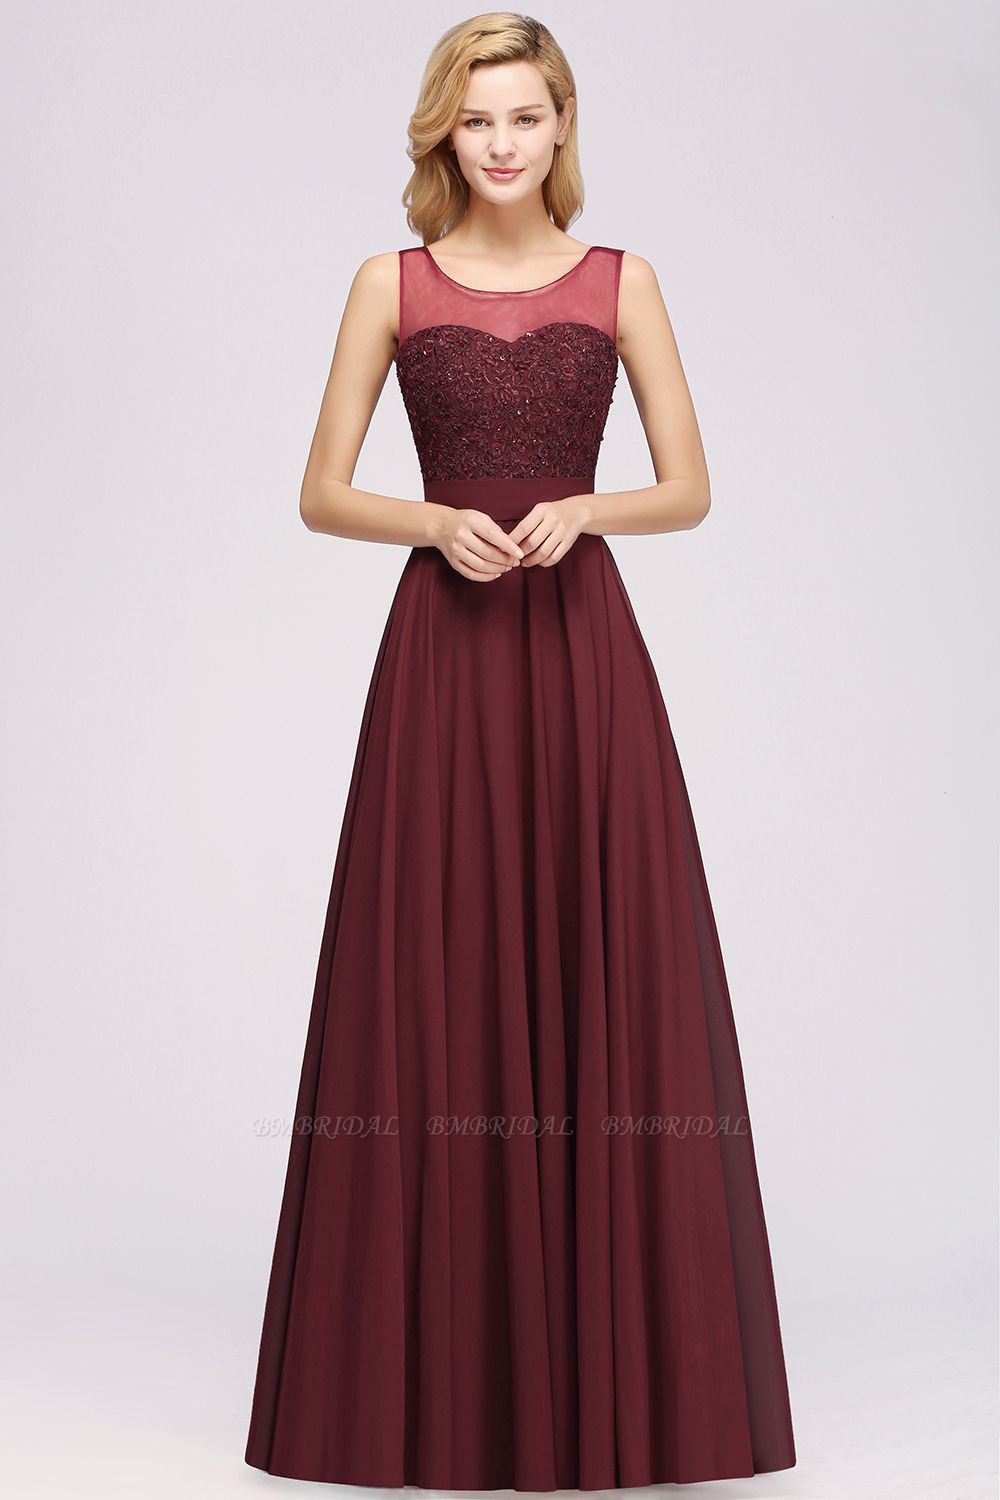 BMbridal Gorgeous Lace Jewel Affordable Pink Bridesmaid Dress with ...